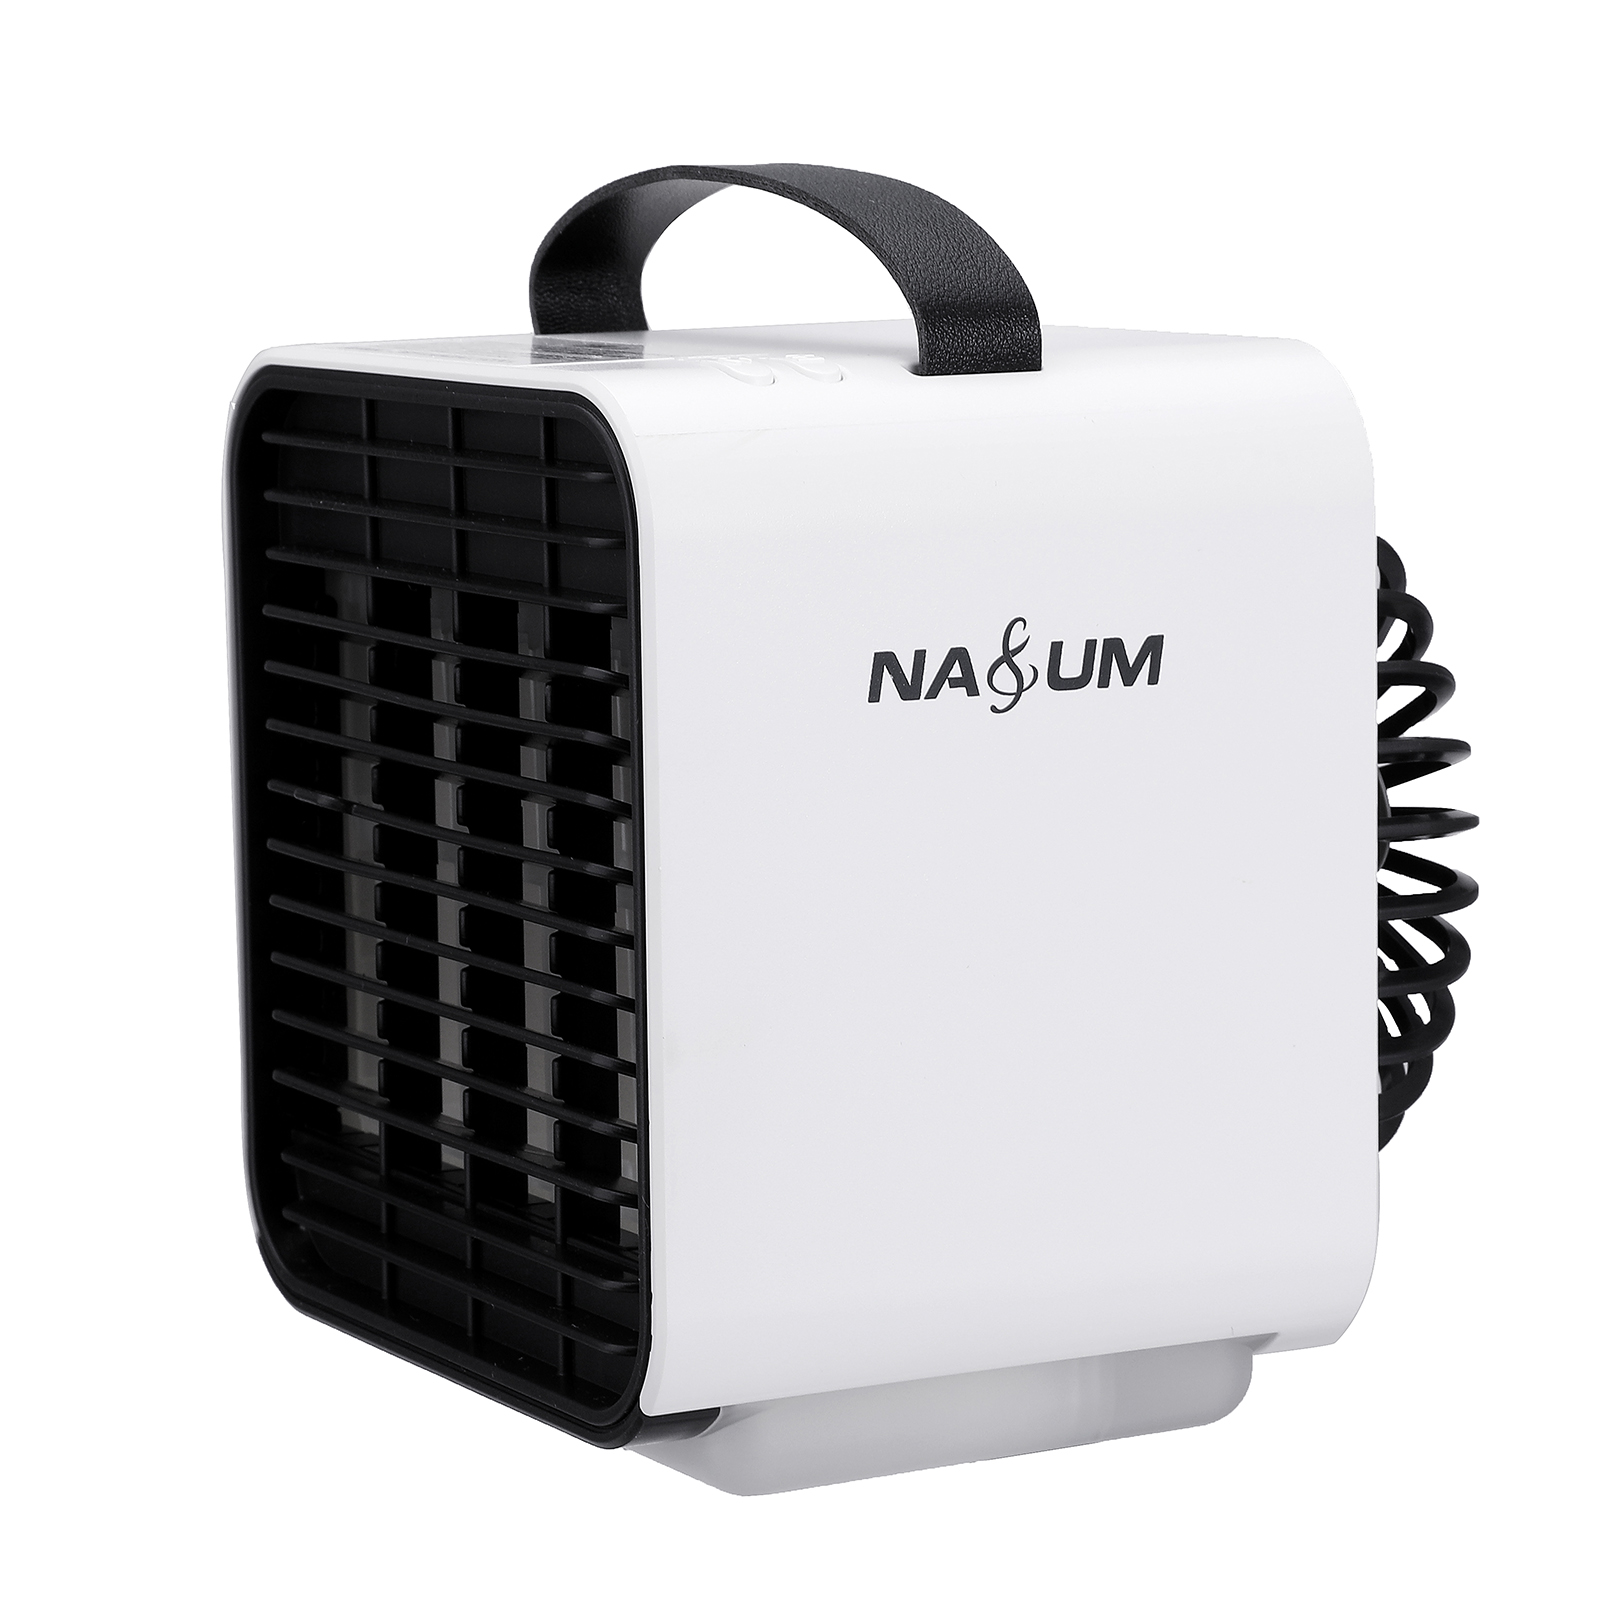 4-in-1-Mini-Air-Cooler-Portable-USB-Air-Conditioning-2000mAh-Cooling-Fan-3-Wind-Speed-Adjustment-Nig-1885394-9